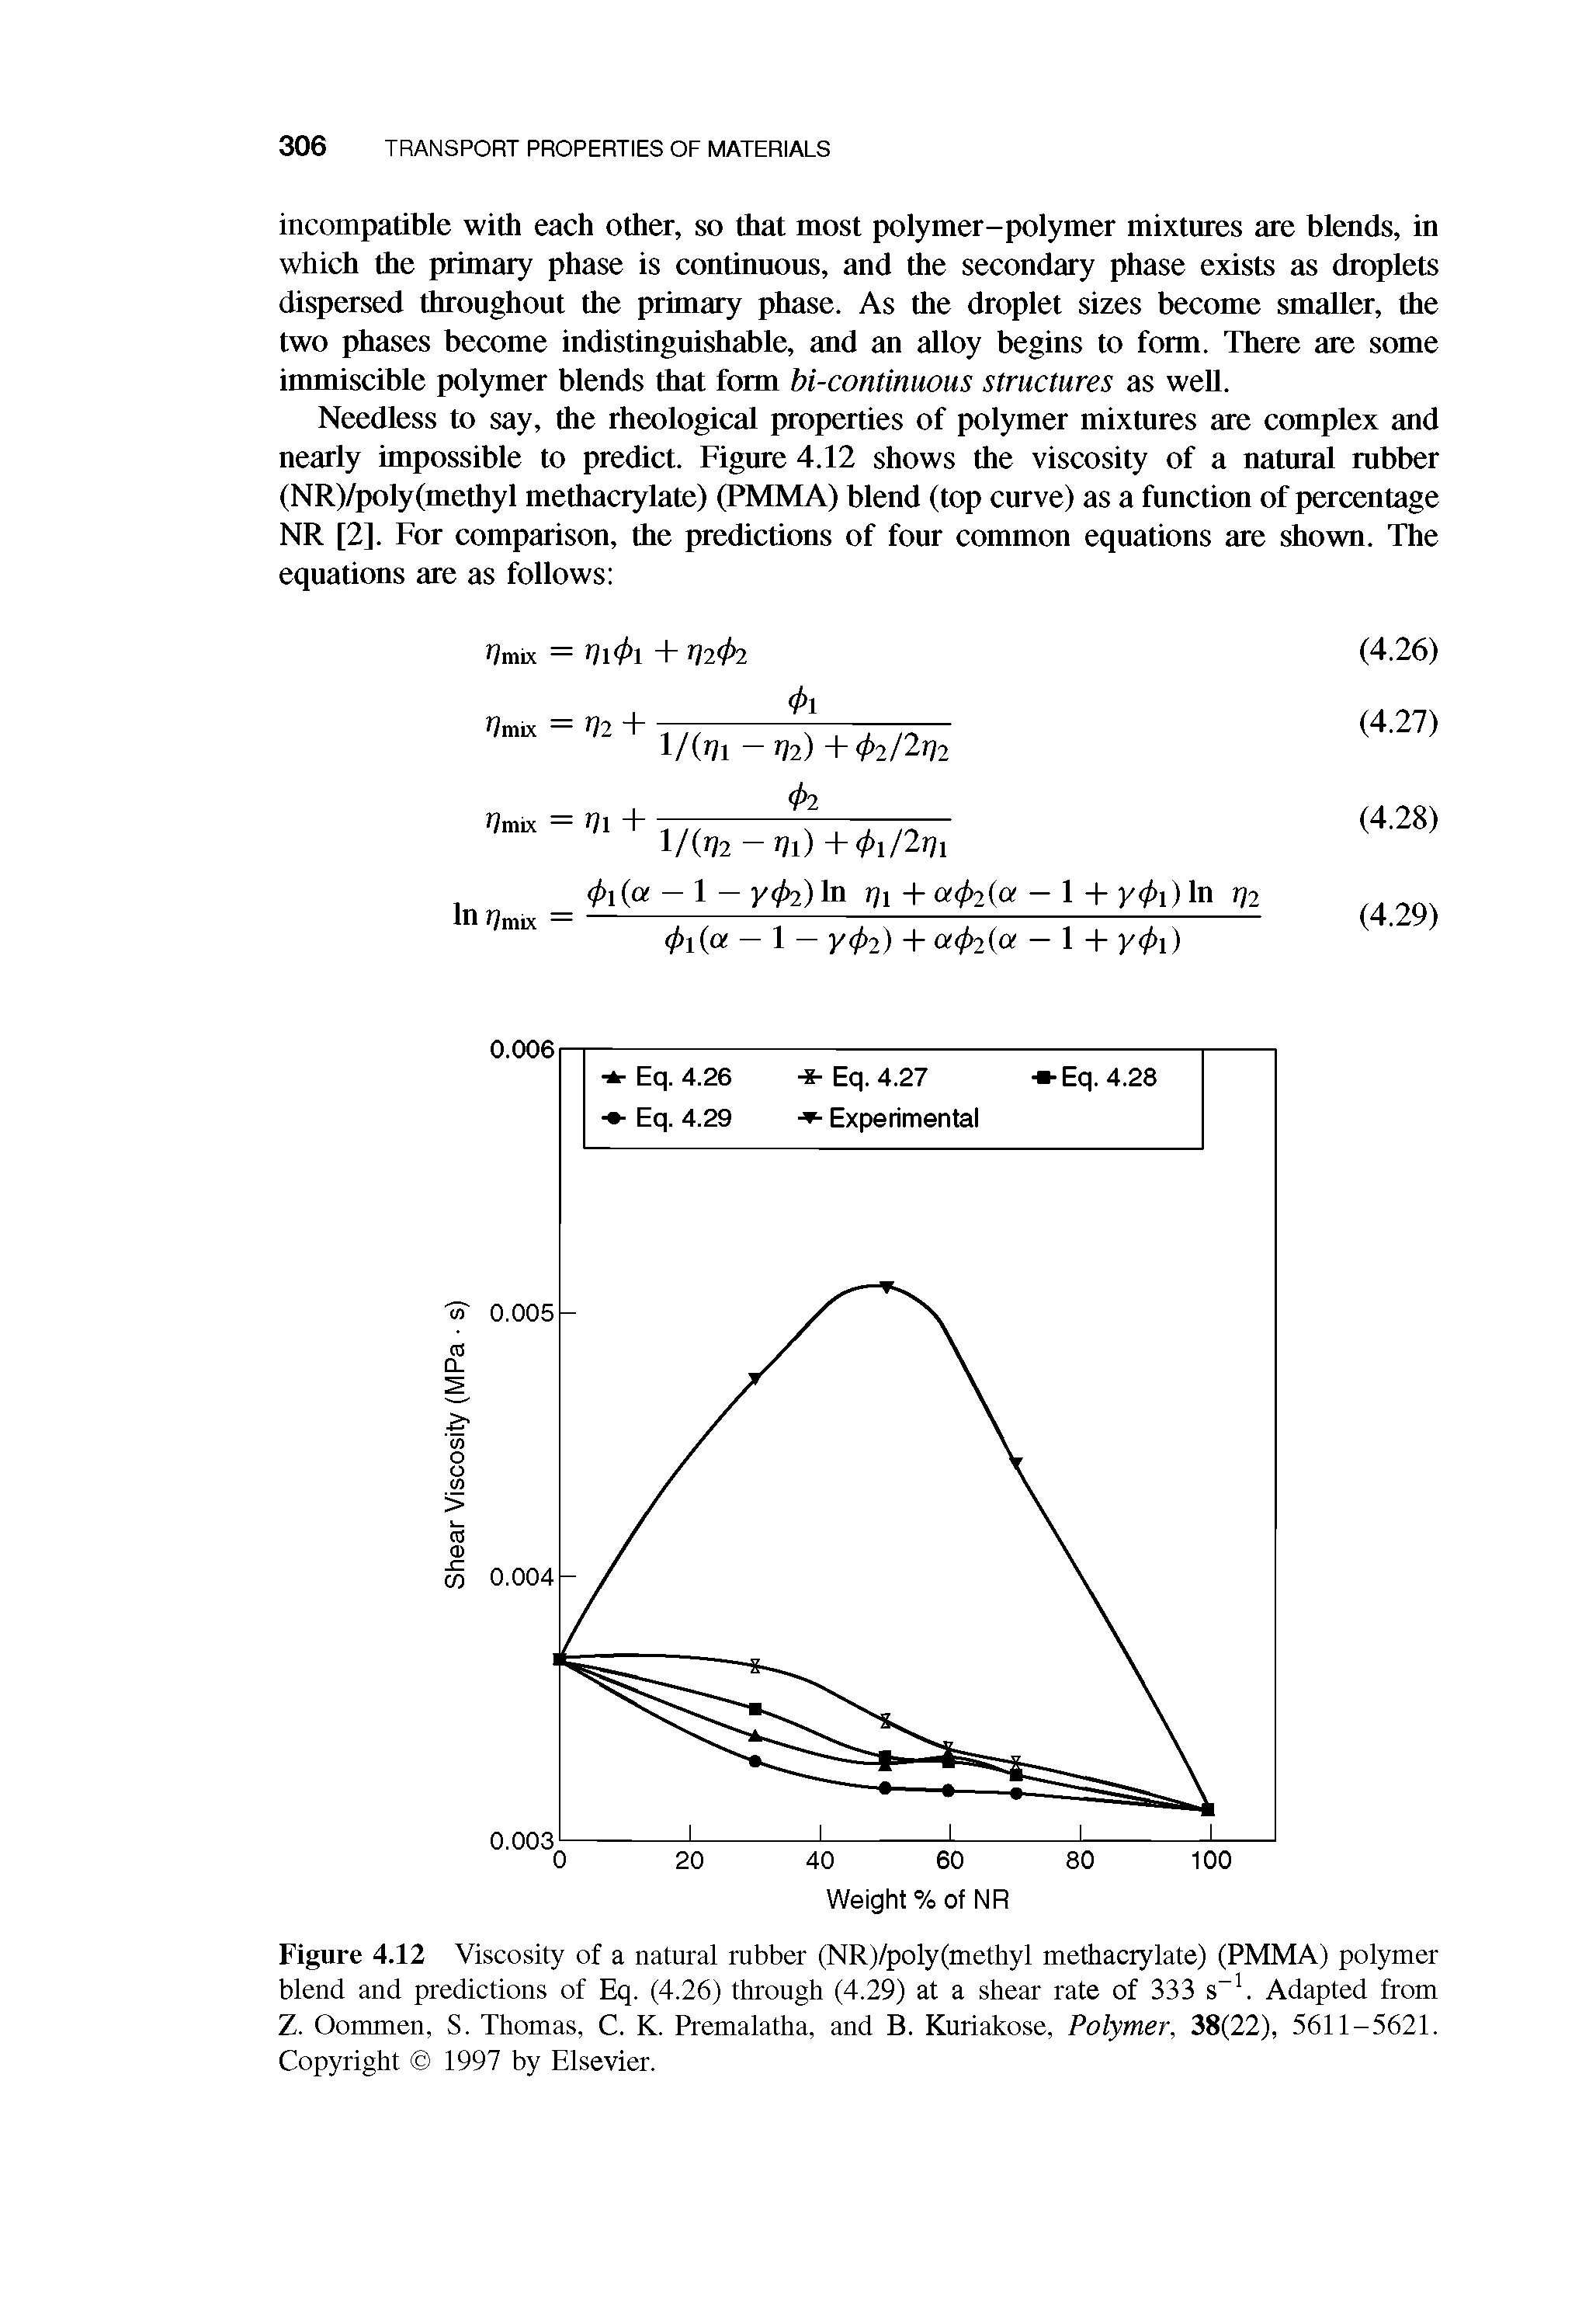 Figure 4.12 Viscosity of a natural rubber (NR)/poly(methyl methacrylate) (PMMA) polymer blend and predictions of Eq. (4.26) through (4.29) at a shear rate of 333 s . Adapted from Z. Oommen, S. Thomas, C. K. Premalatha, and B. Kuriakose, Polymer, 38(22), 5611-5621. Copyright 1997 by Elsevier.